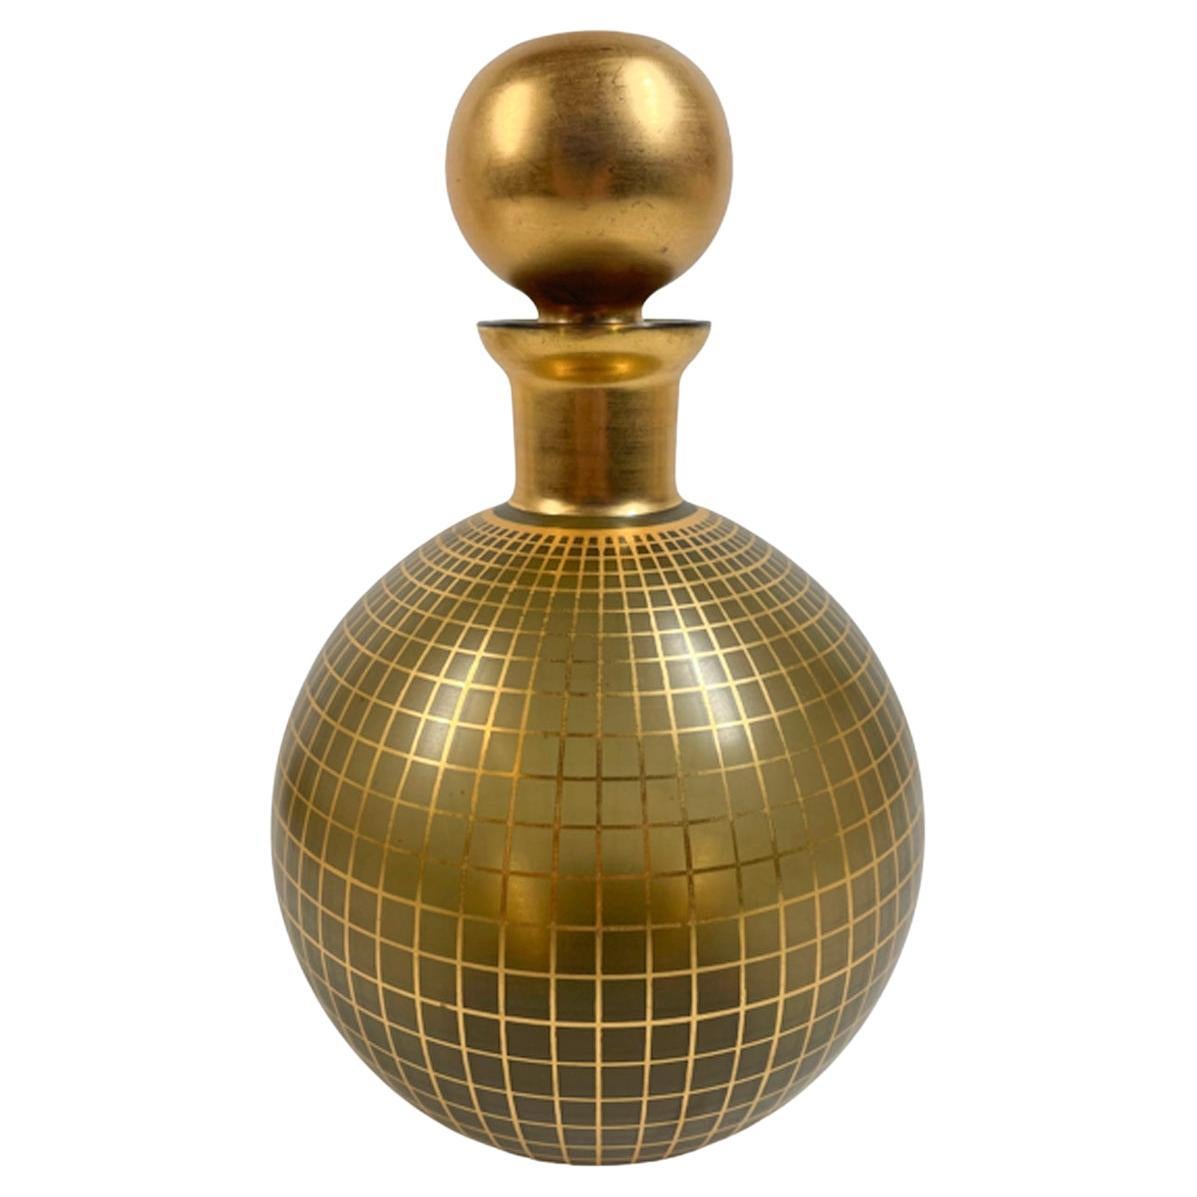 Art Deco Decanter Set, Ball Shaped Decanter & Snifter Shape Glass with Gold Grid